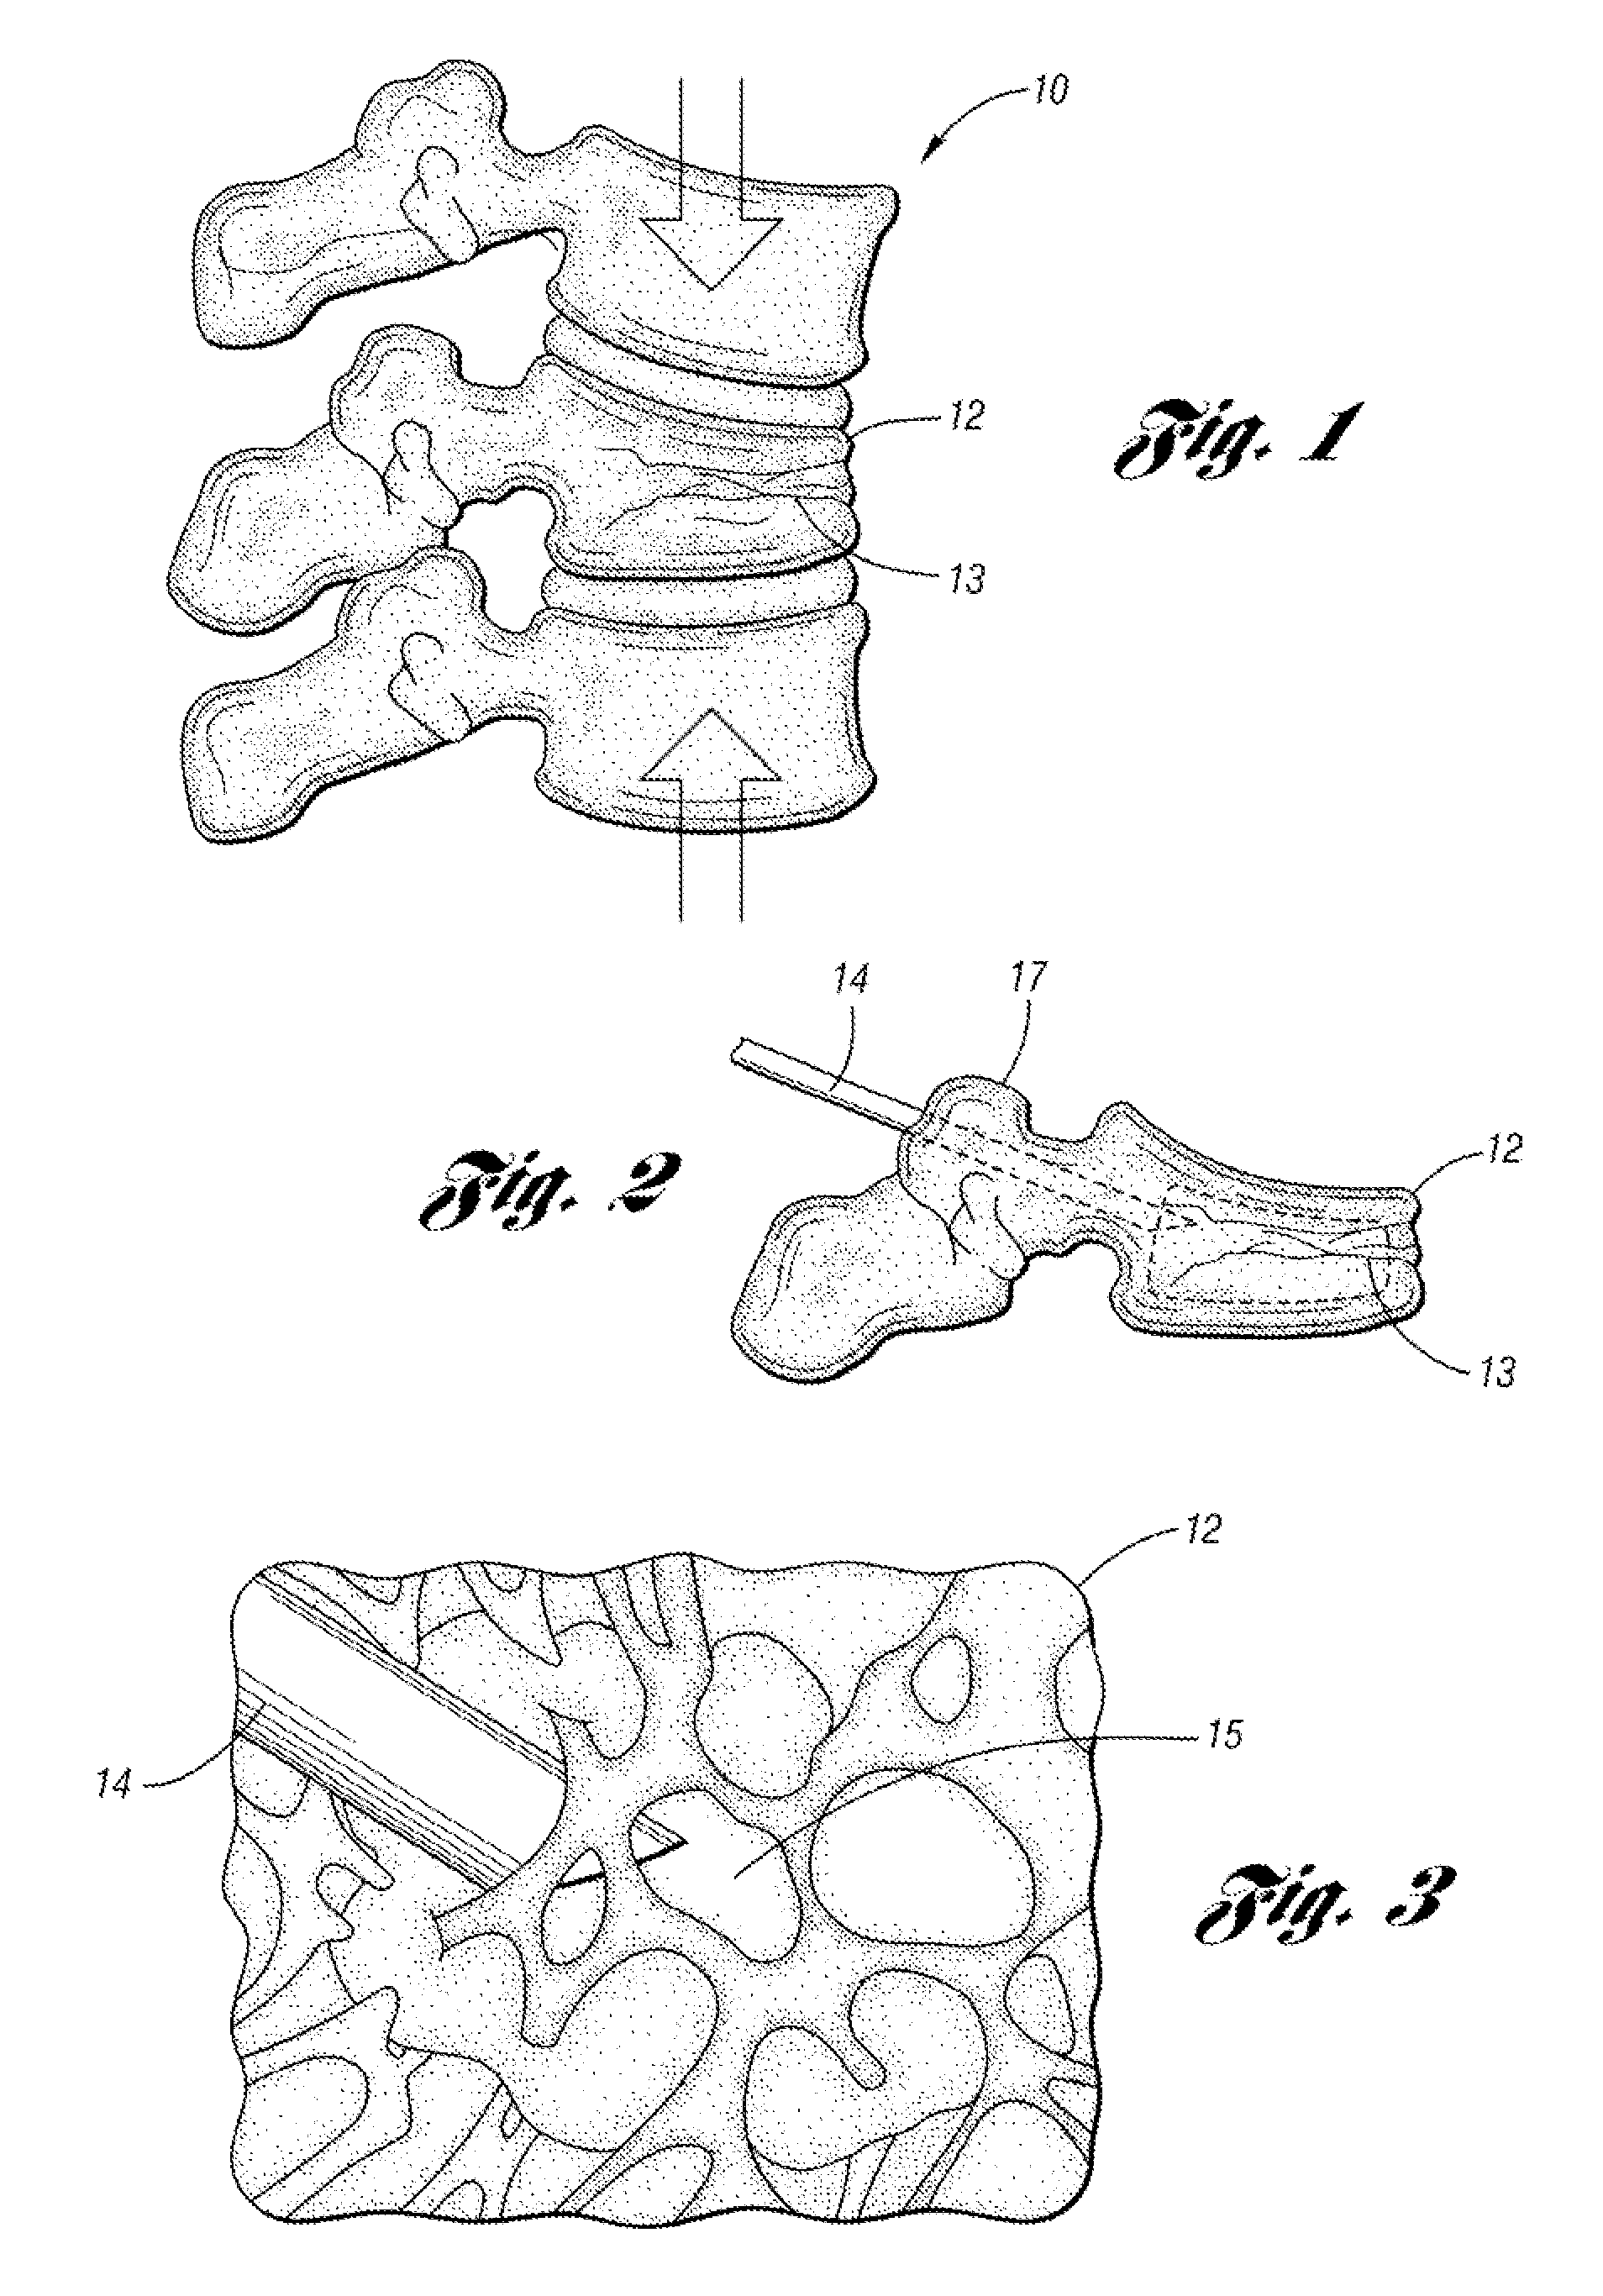 Bone cement mixing and delivery device and method of use